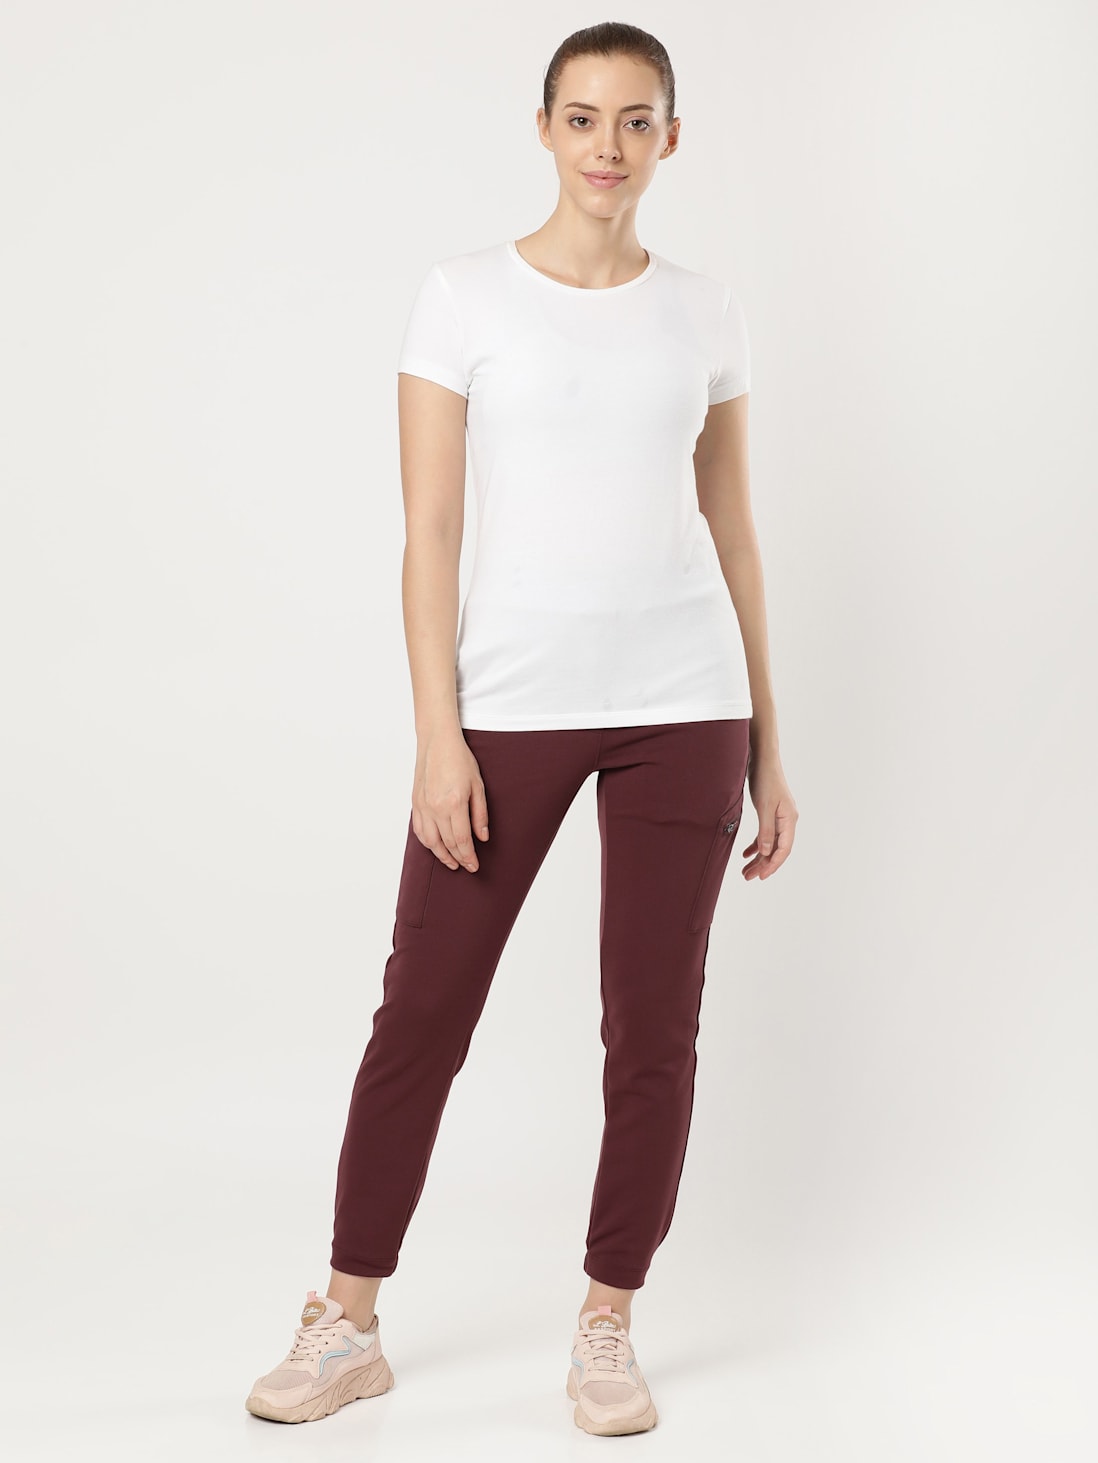 Women's Trousers For Travelling | John Lewis & Partners